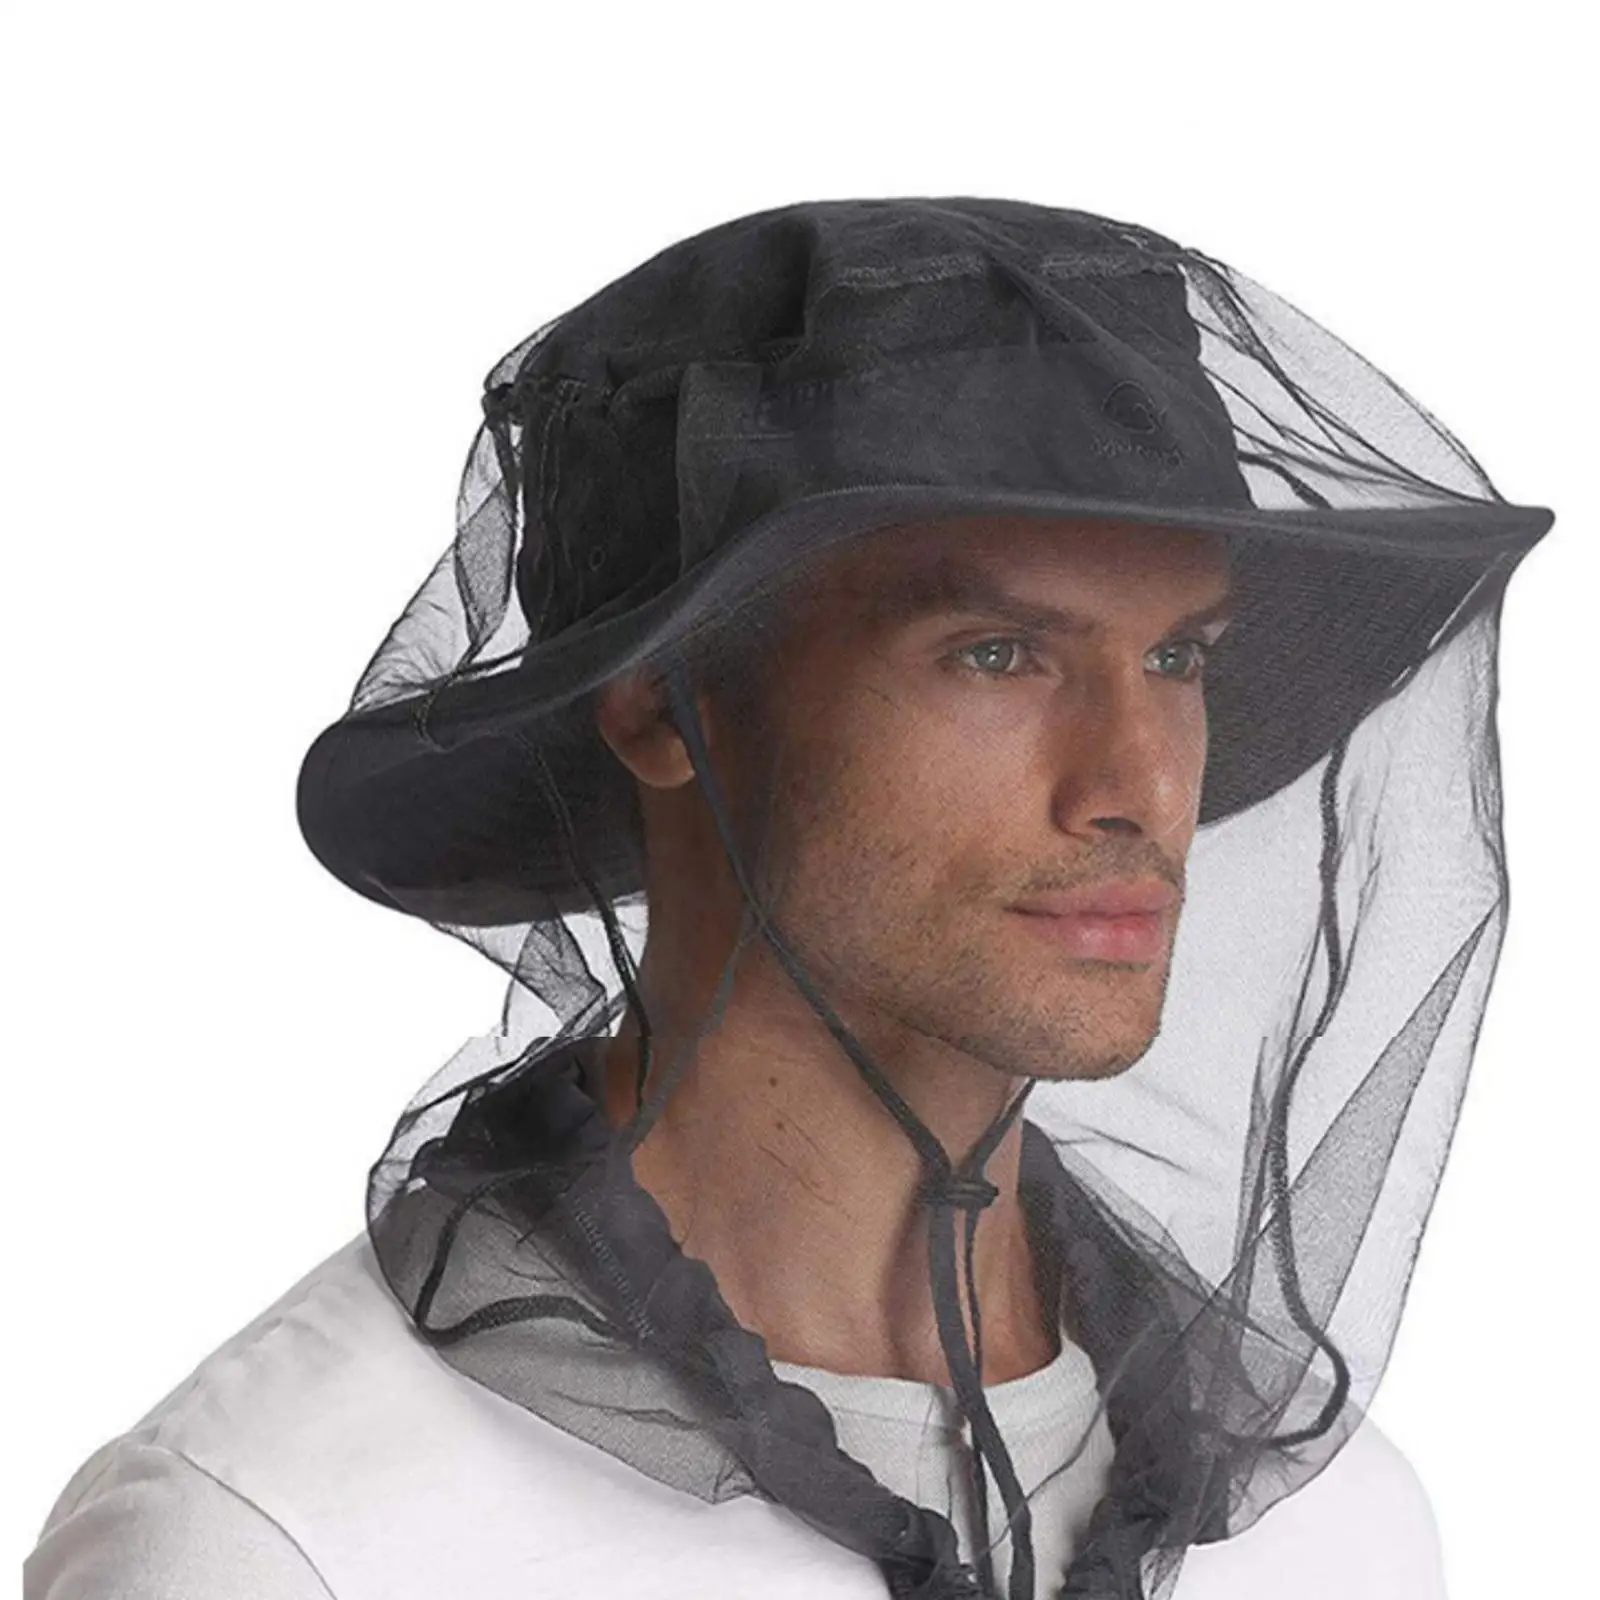 

Outdoor Fishing Bee Bite Hat Mesh Cover Mosquito Insect Hat Fishing Mesh Net Face 1pc Travel Bug Camping Protector P8r4